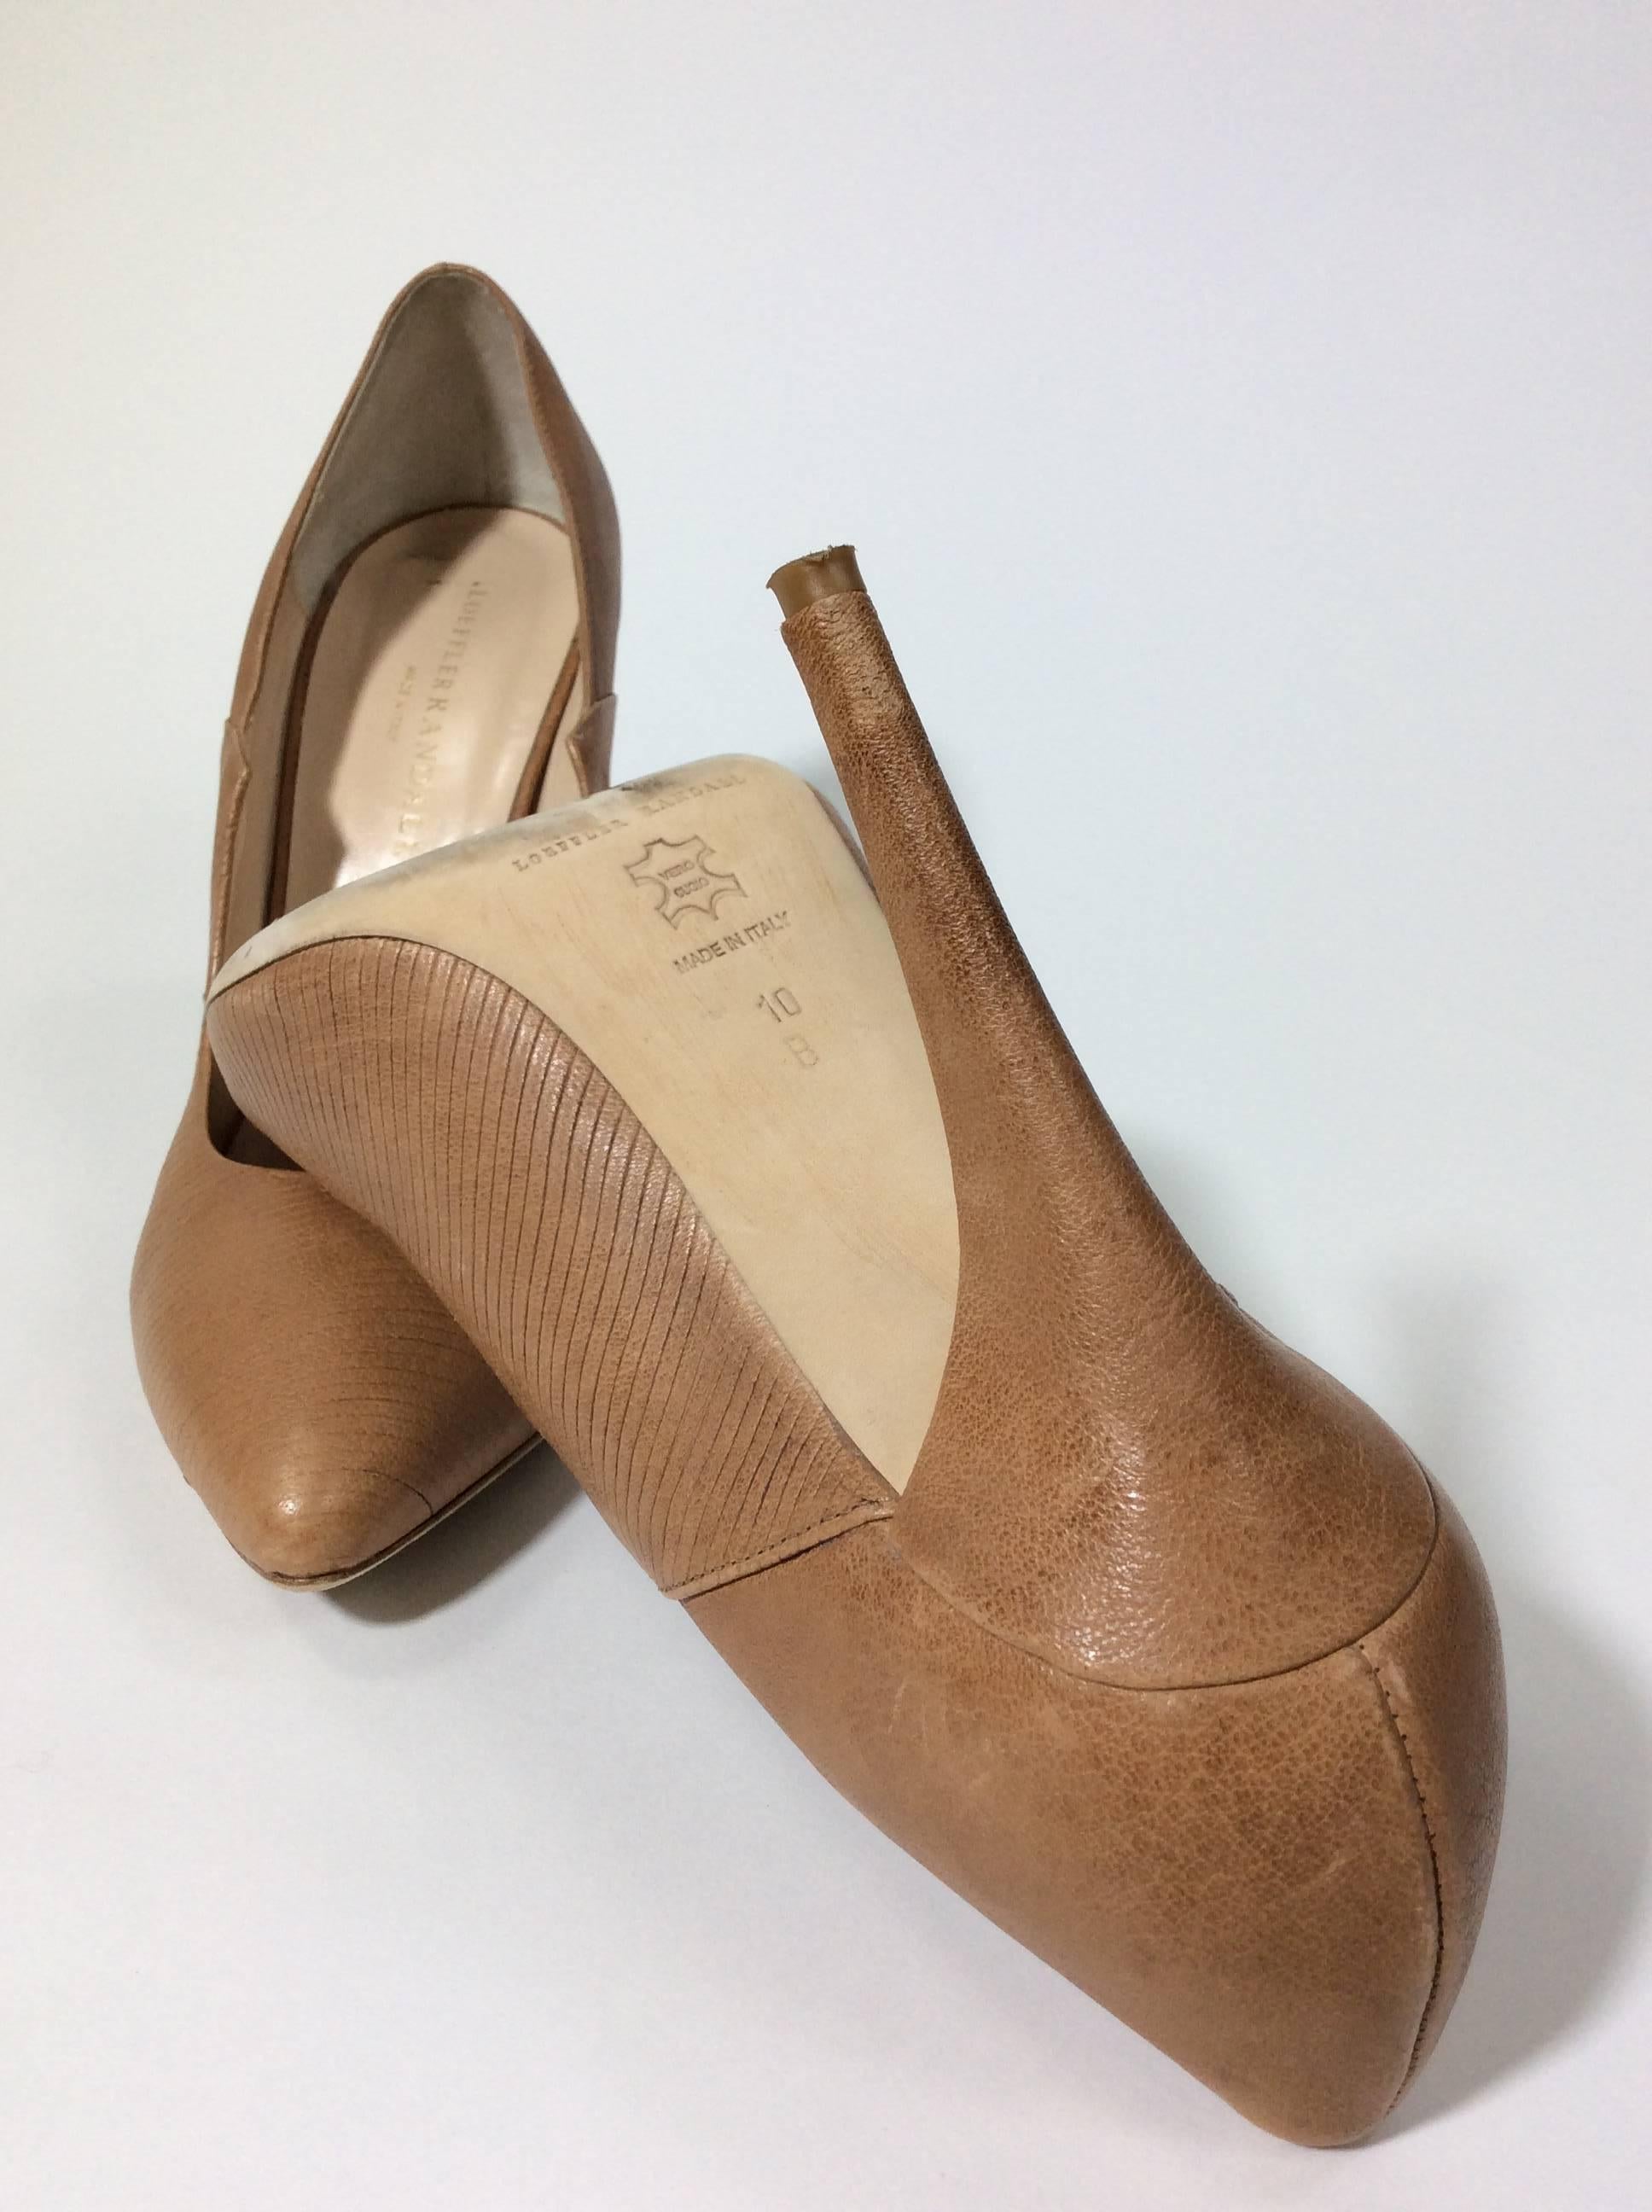 Nude Textured Point Detail Pumps
4 inch heel
3 inch sole width
Pointed silhouette detail on sides of shoe
Size 10
Leather sole, upper and lining